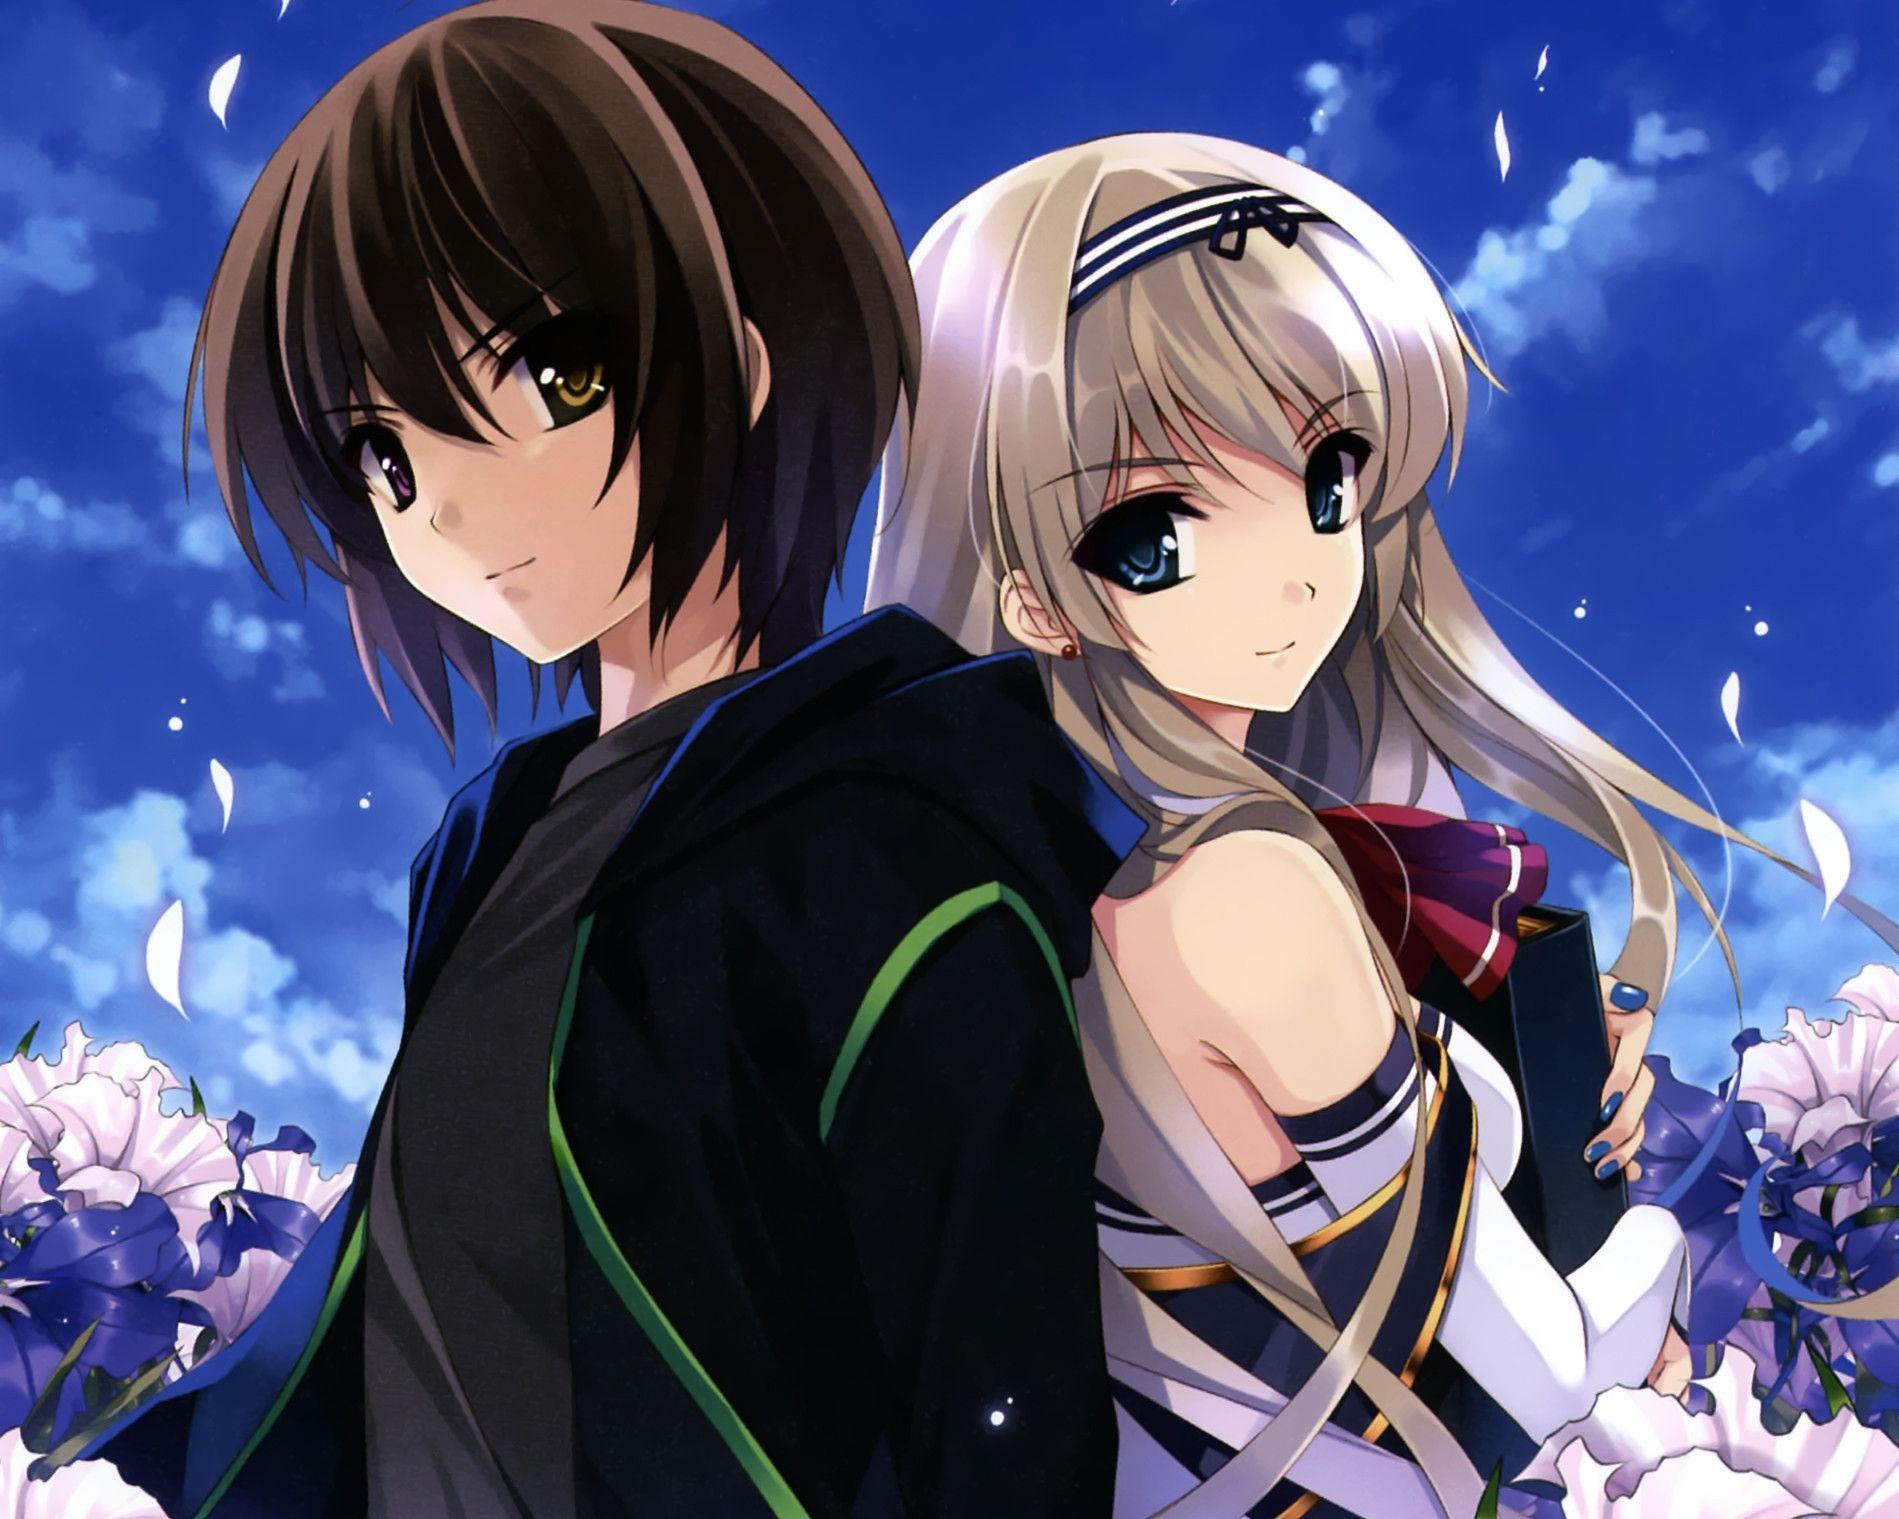 Cute Couple Love - Anime With Mountains Wallpaper Download | MobCup